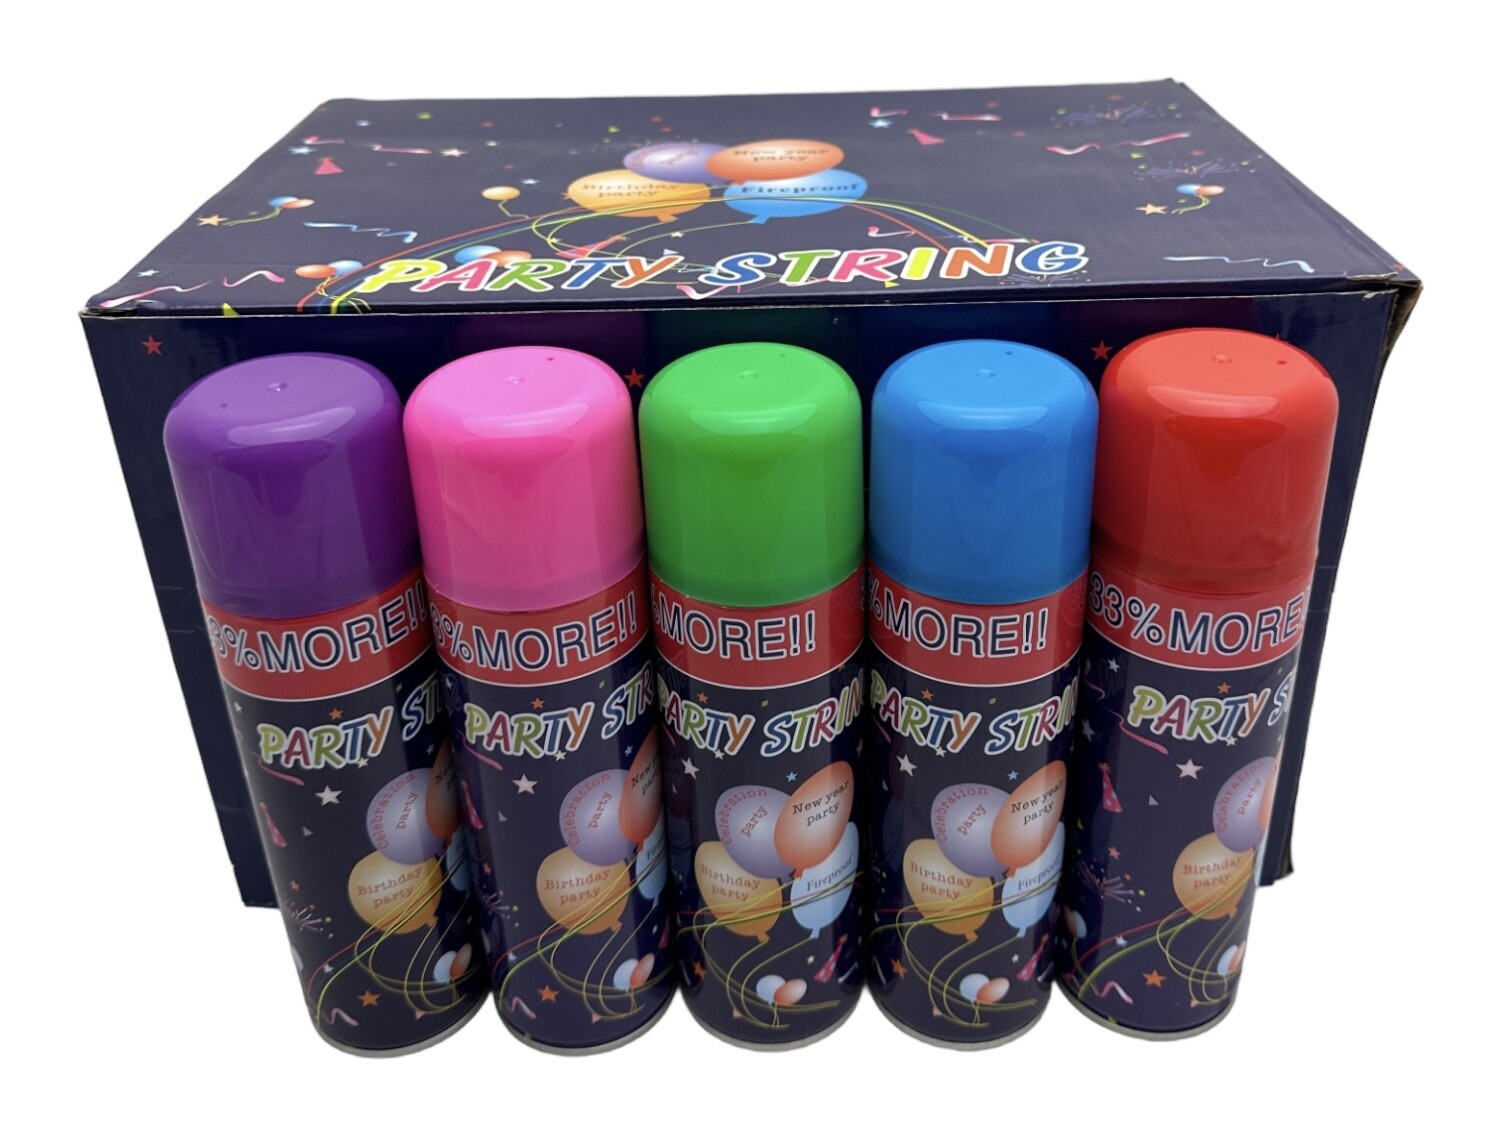 $3.59 NOVELTY MIX / PARTY SILLY STRING CAN (24 PCS) / 1748 - B8700